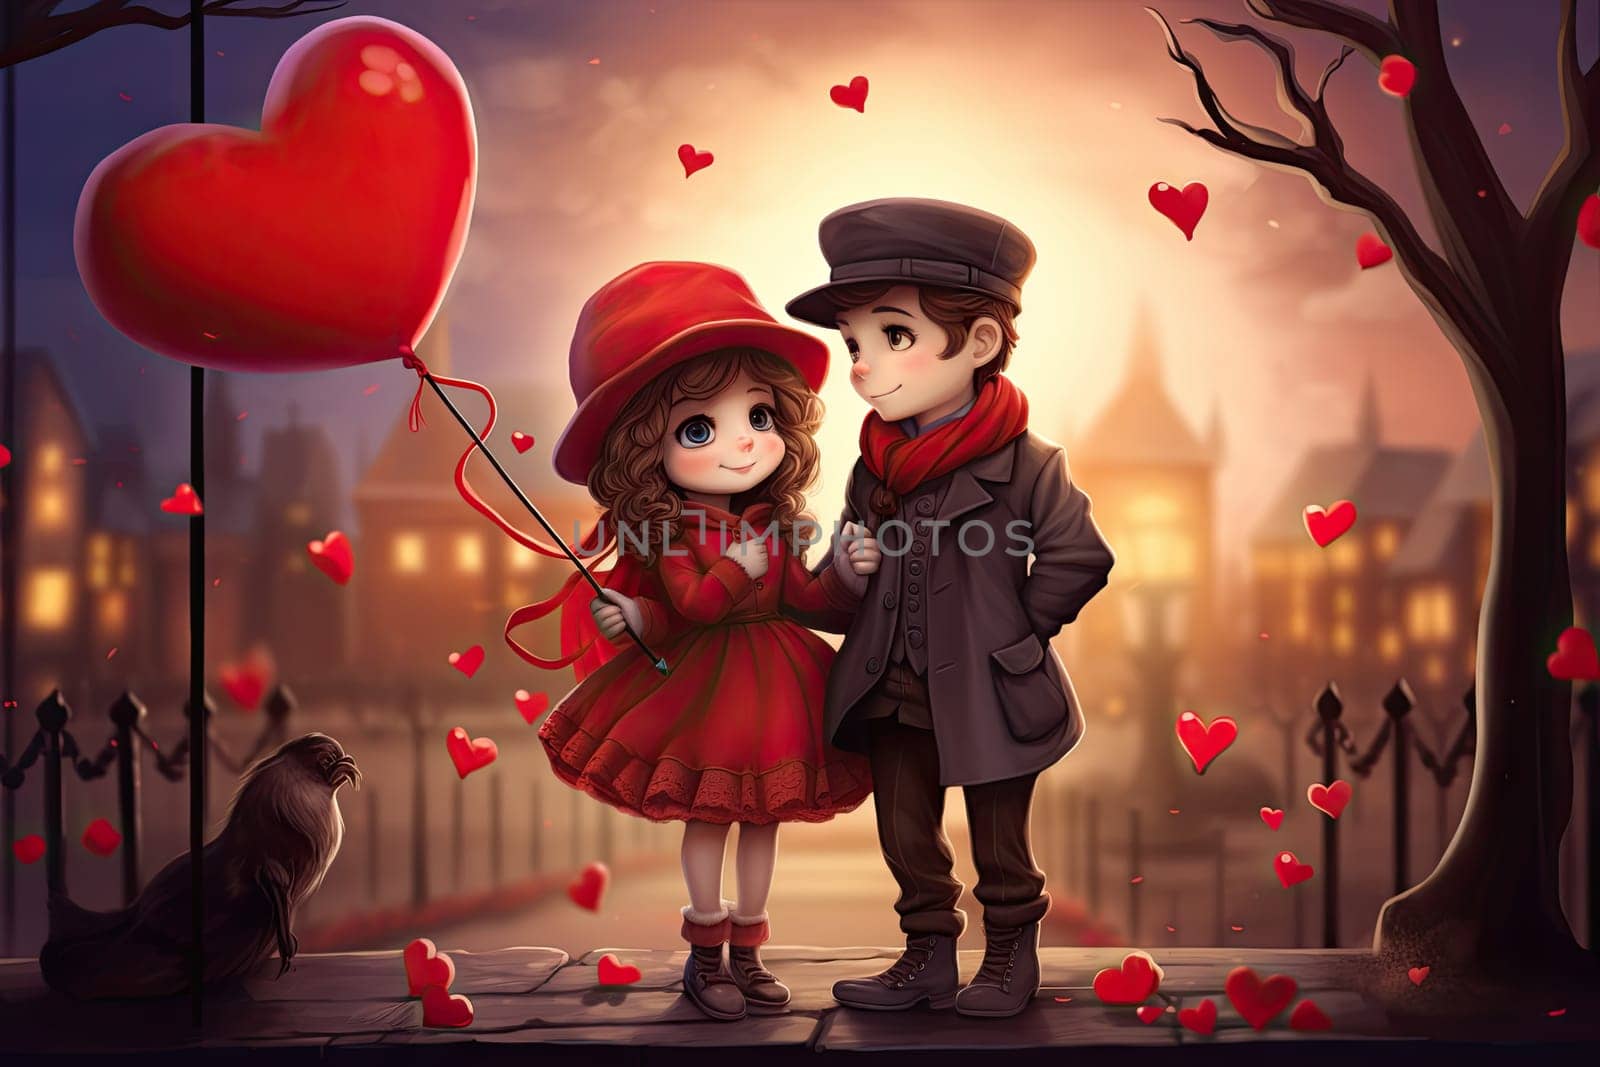 Illustration of young couple in love walking in winter time surrounded by hearts.